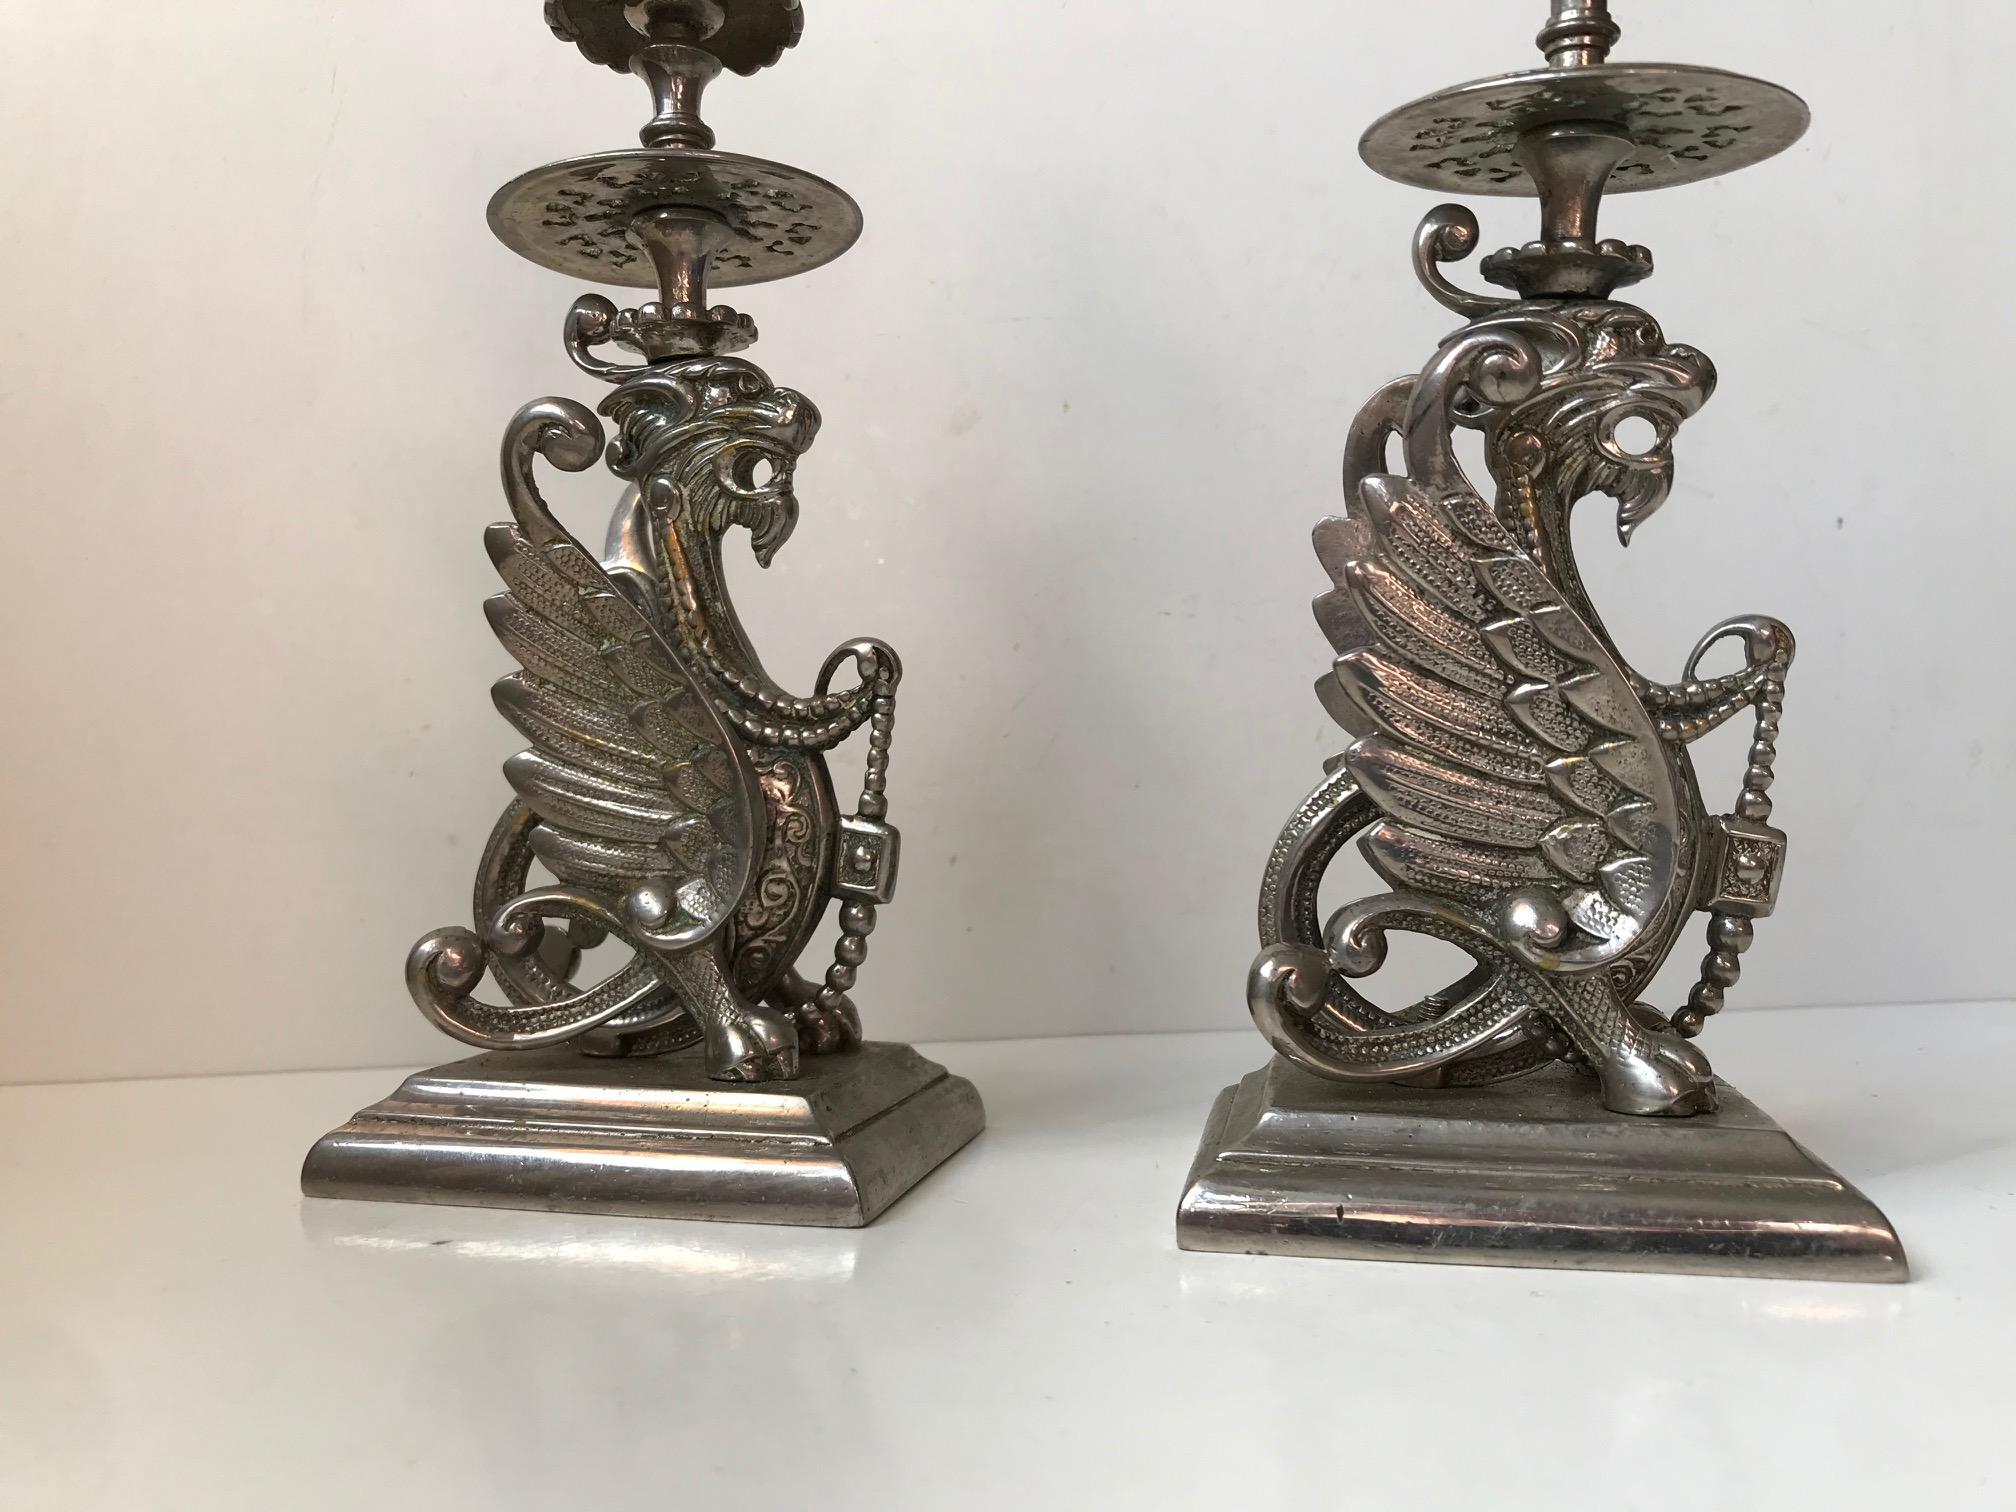 A griffin dragon is a mythical winged creature with the body of a lion and the head and claws of an eagle. The Griffin or Griphon has long been considered as a great protector in Chinese culture. This particular set of silver or nickel-plated